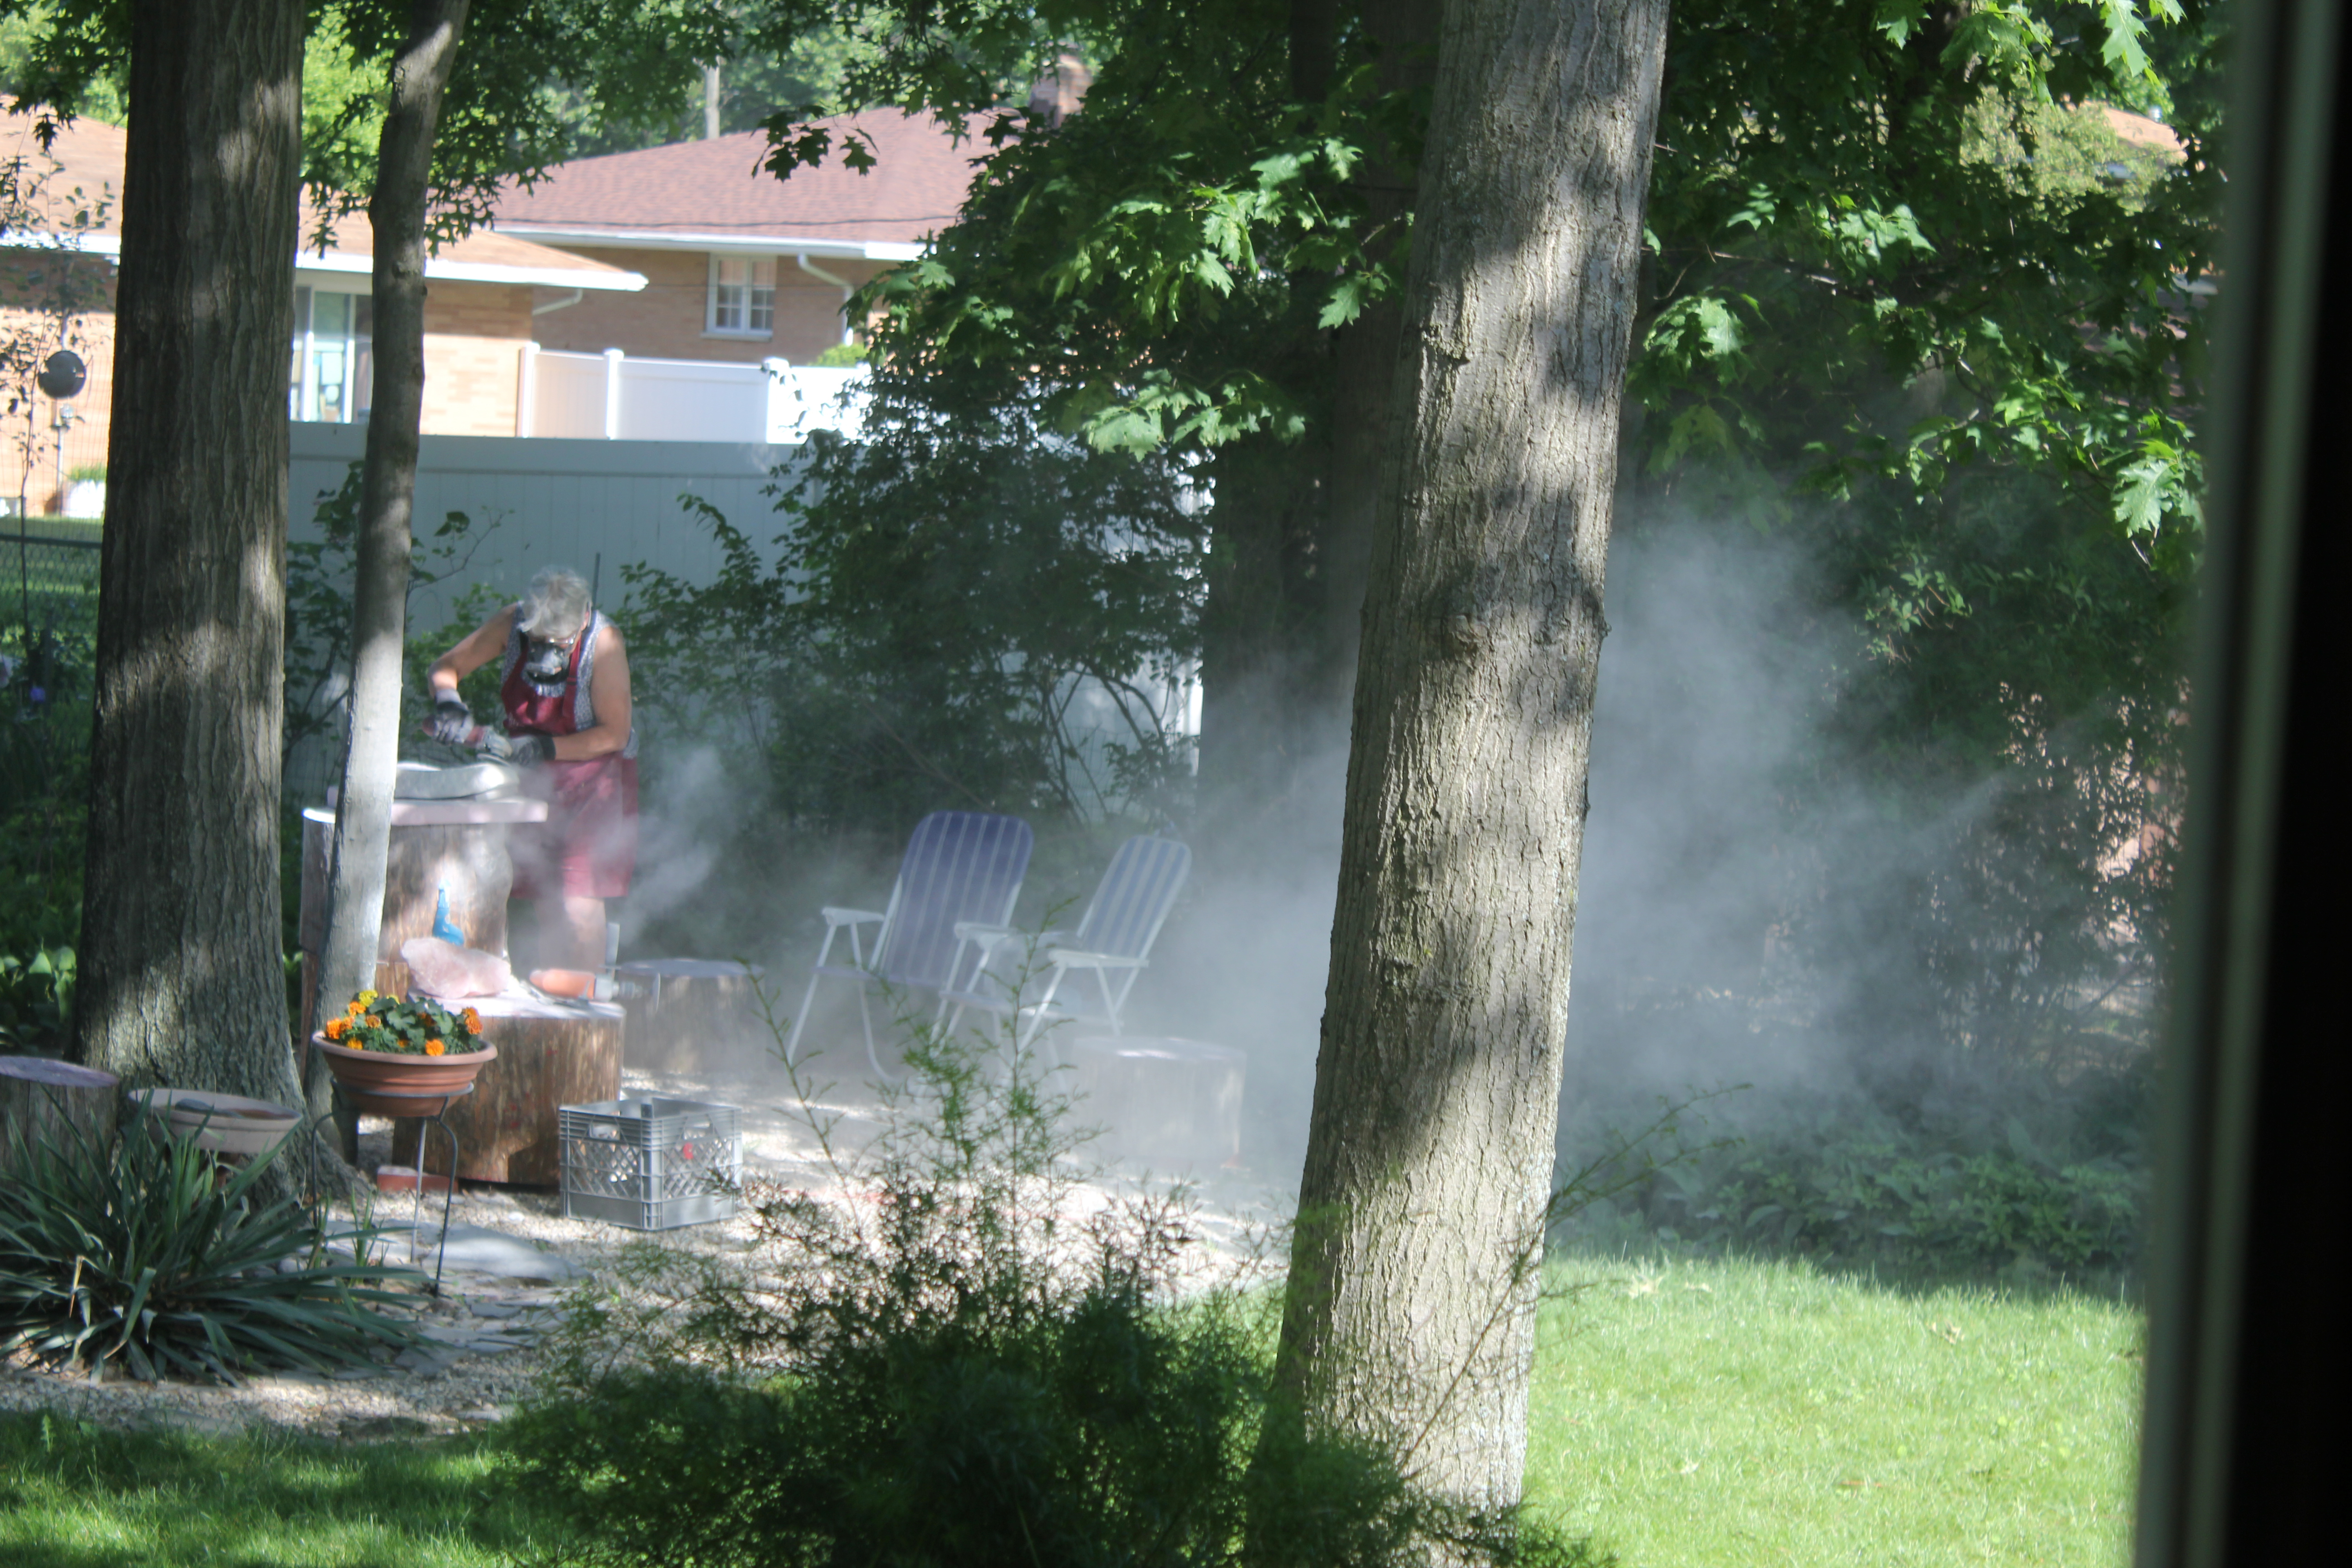 Working in a cloud of dust in our backyard